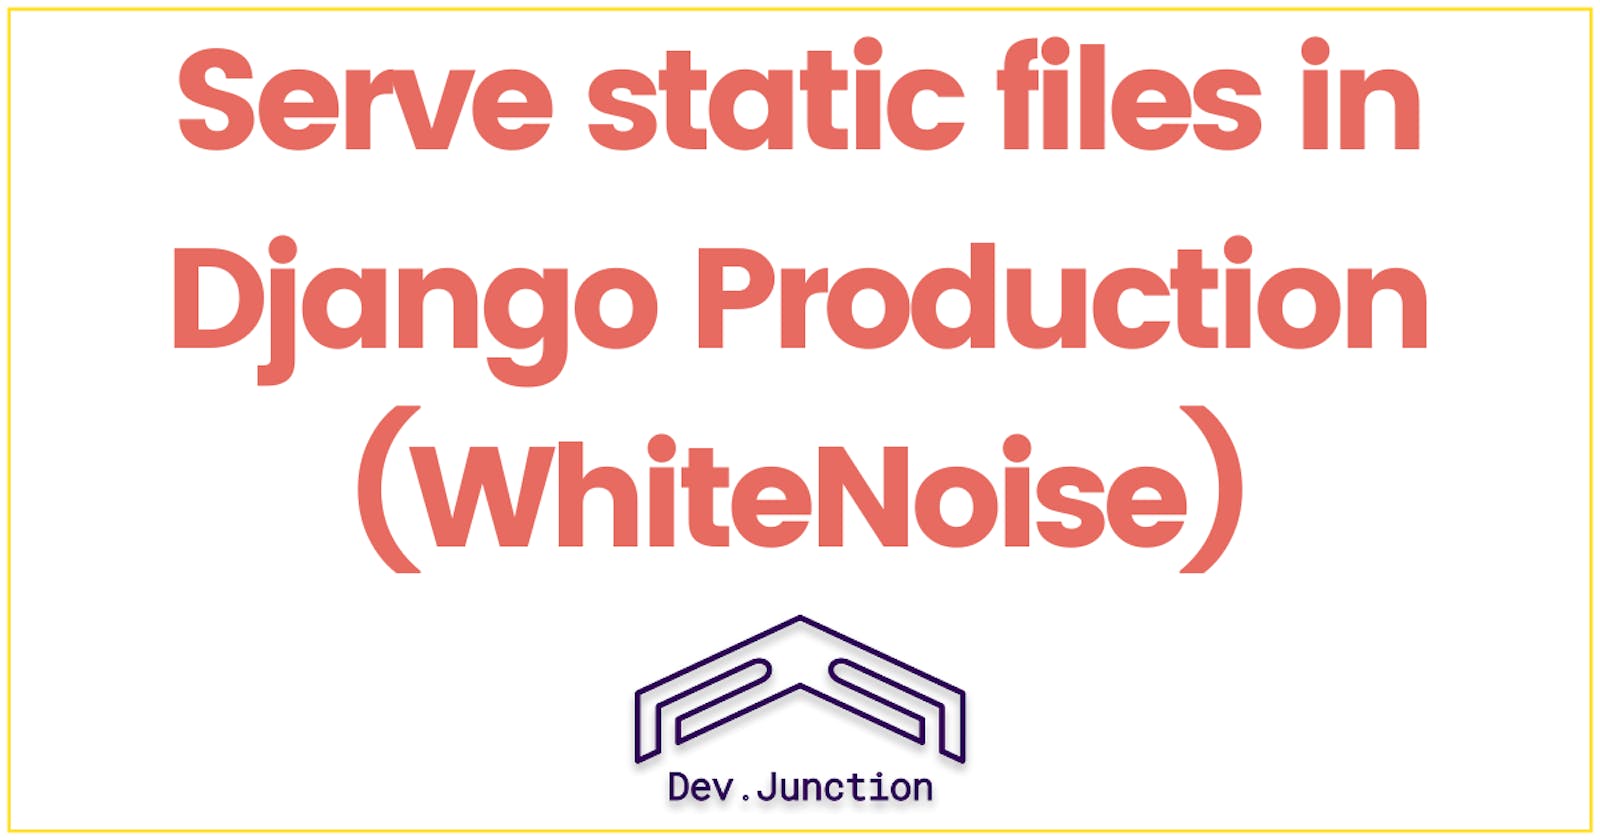 How to serve static files in Django Production with WhiteNoise?